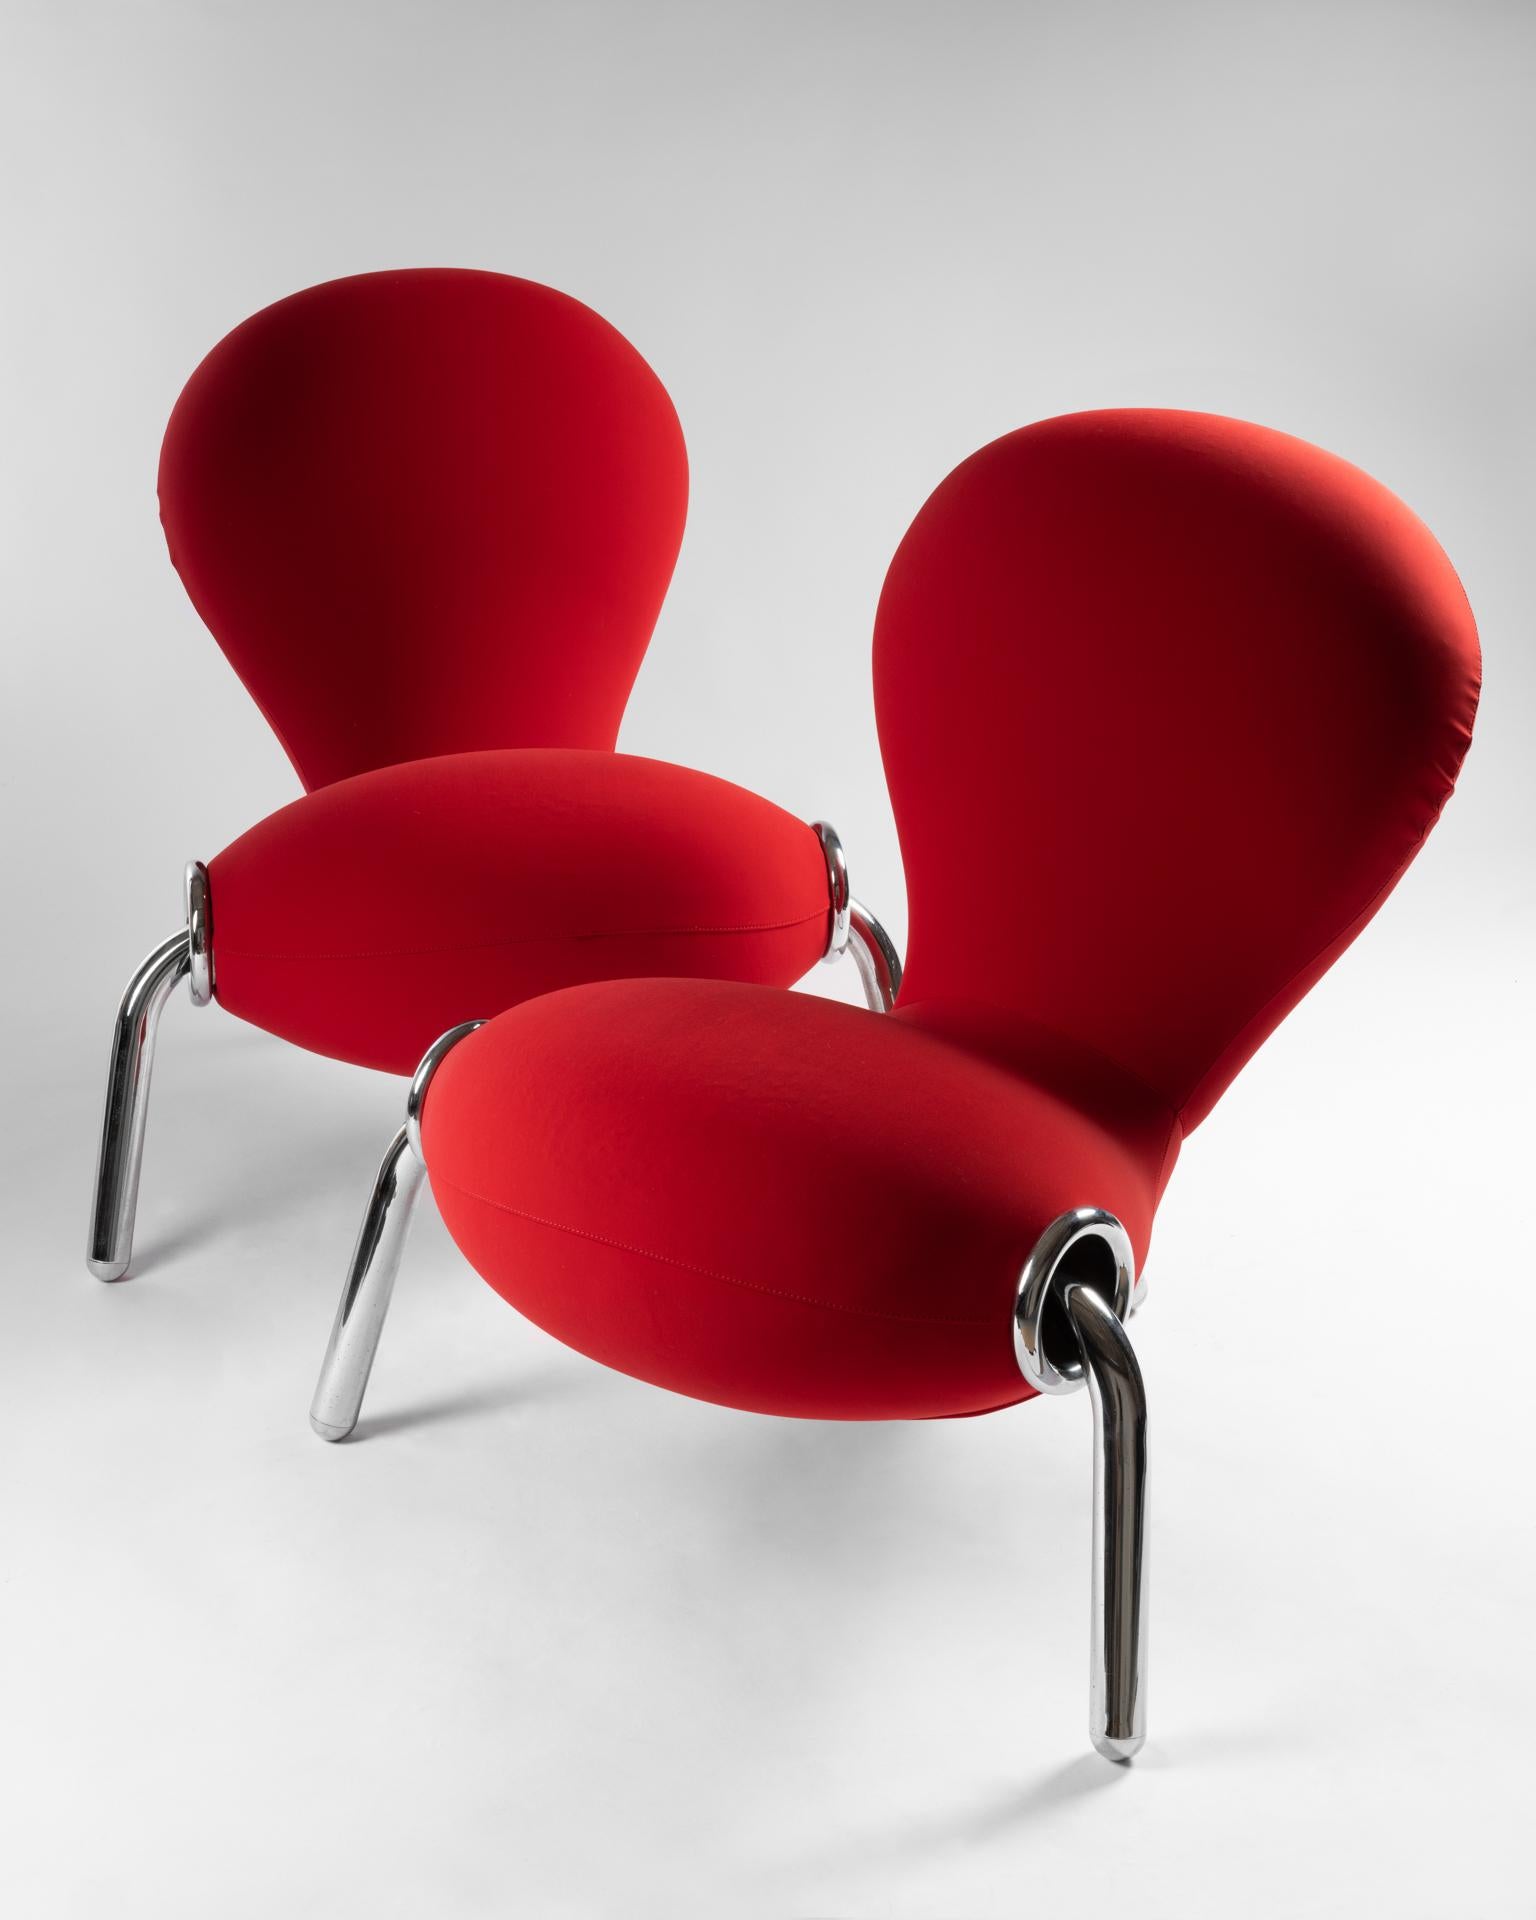 It's 1988, Marc Newson who has just started his career as a designer is invited to design a chair for the 